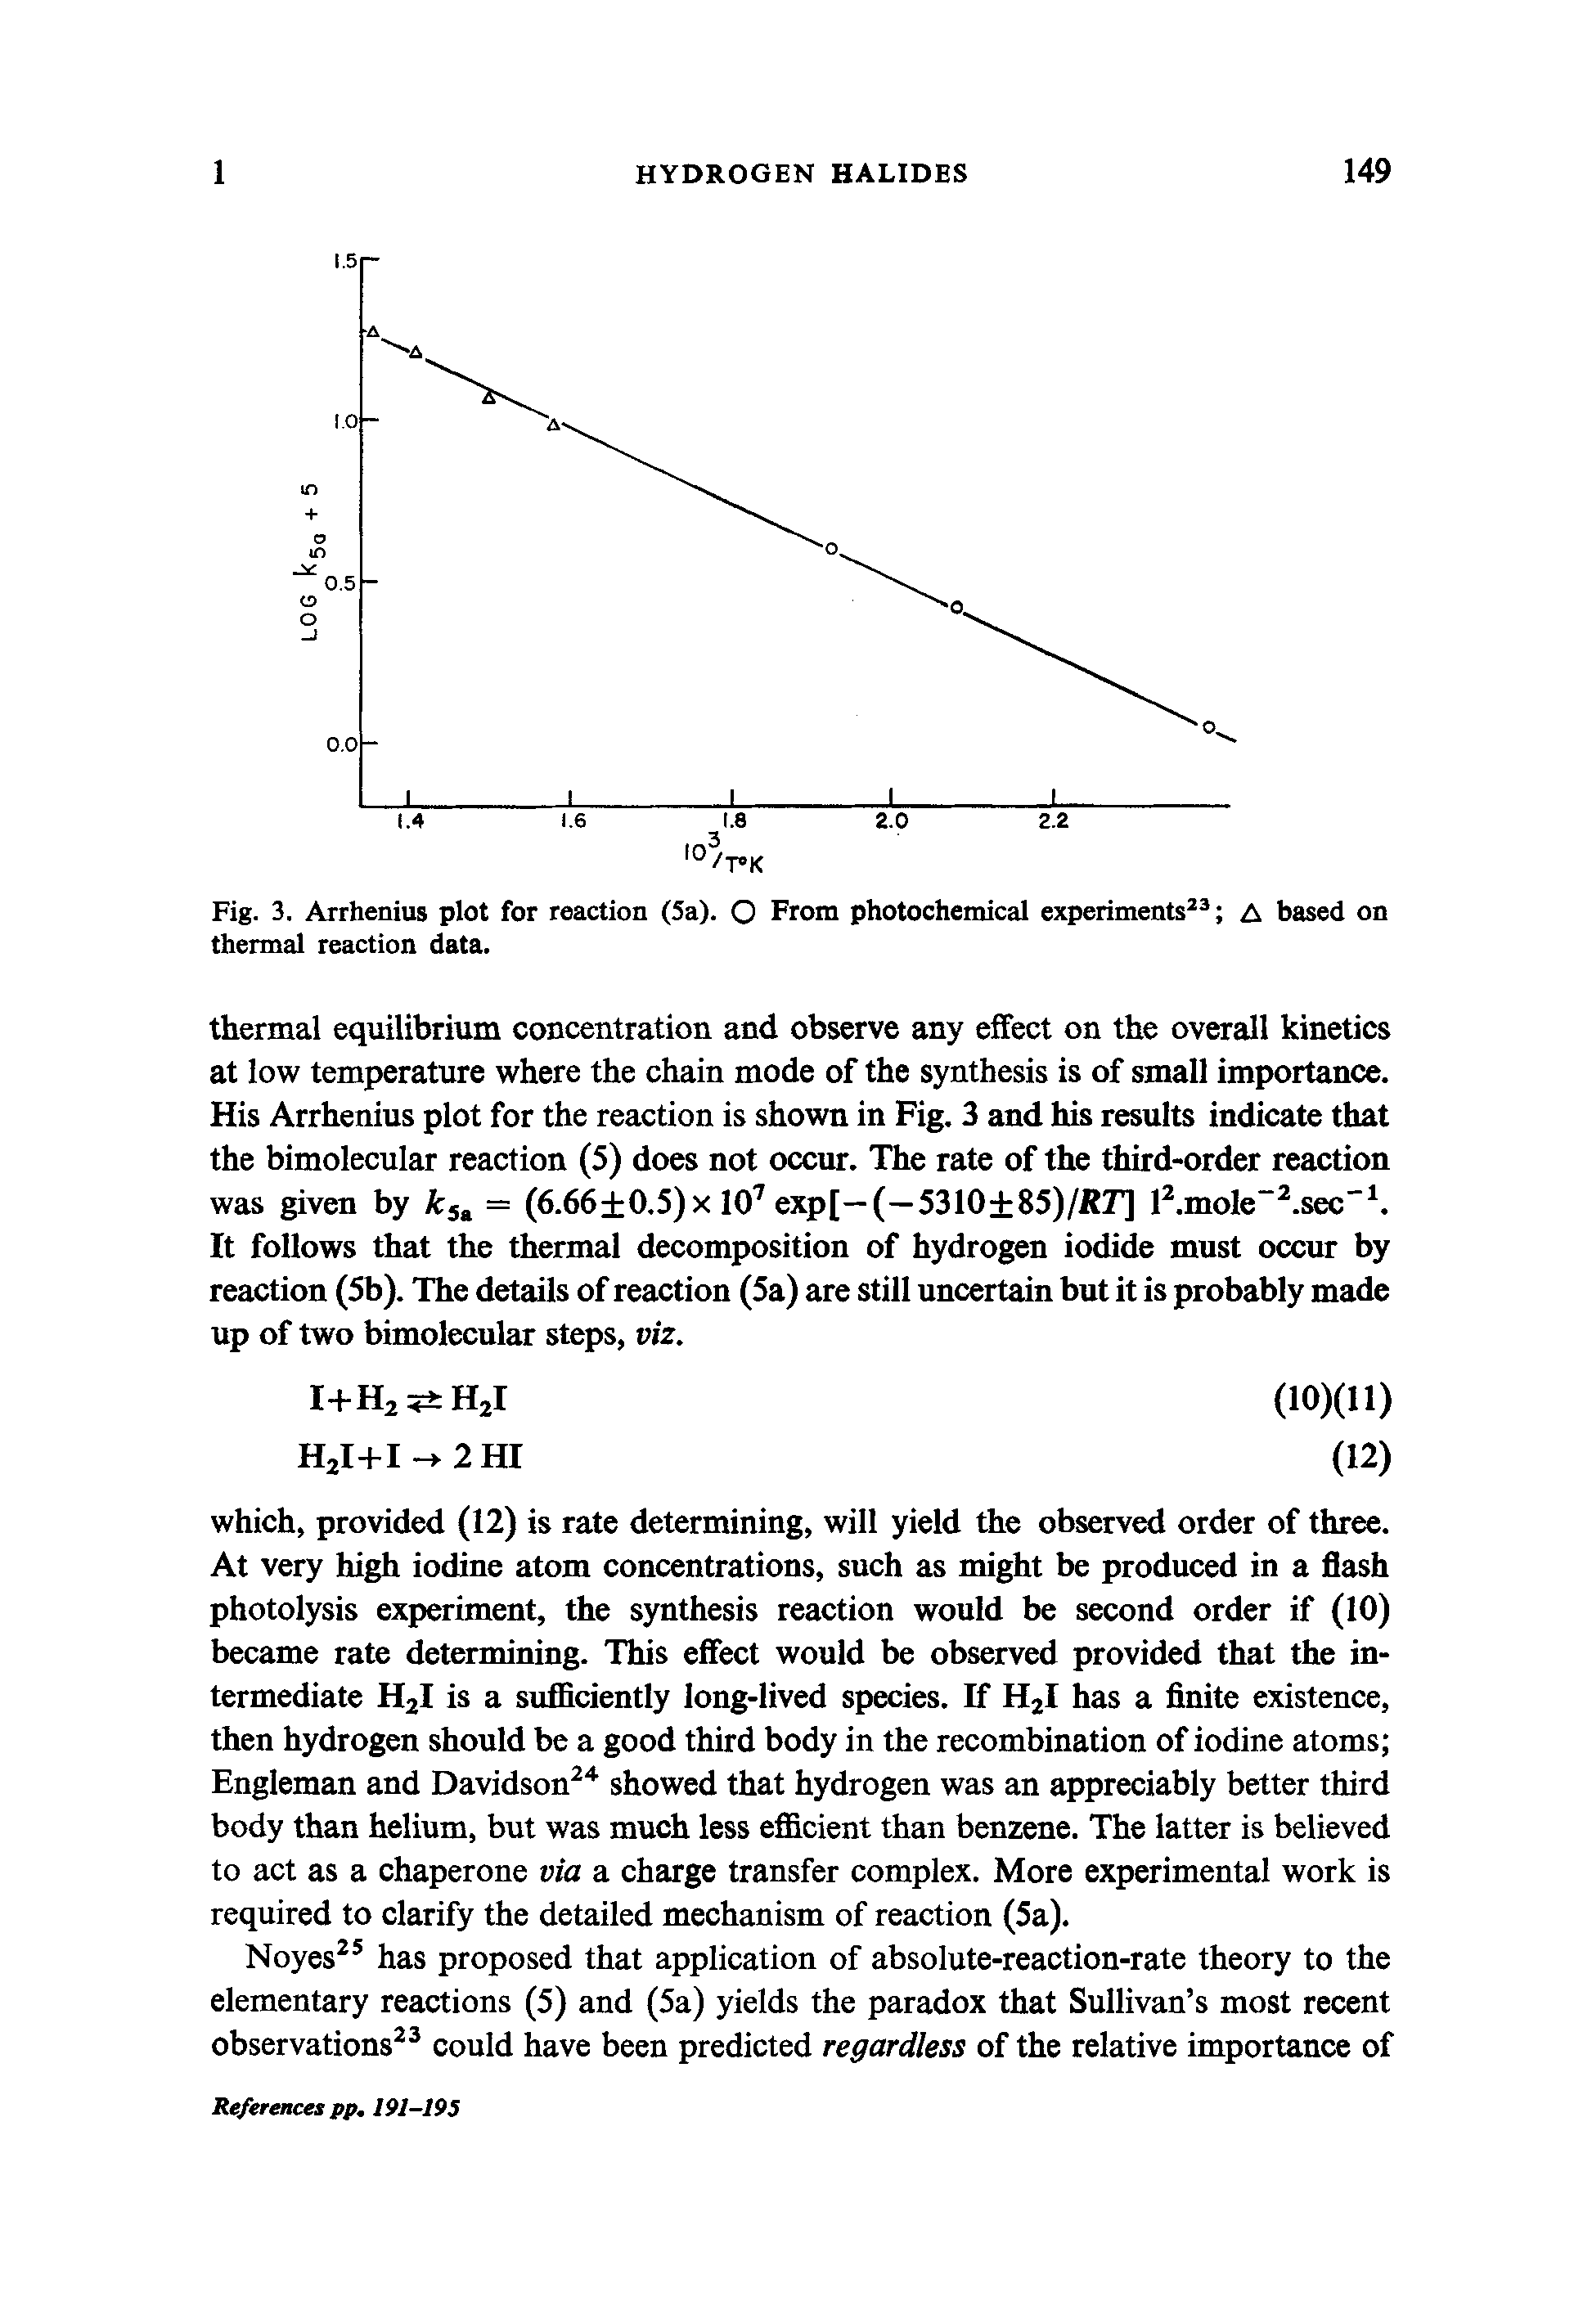 Fig. 3. Arrhenius plot for reaction (5a). O From photochemical experiments23 A based on thermal reaction data.